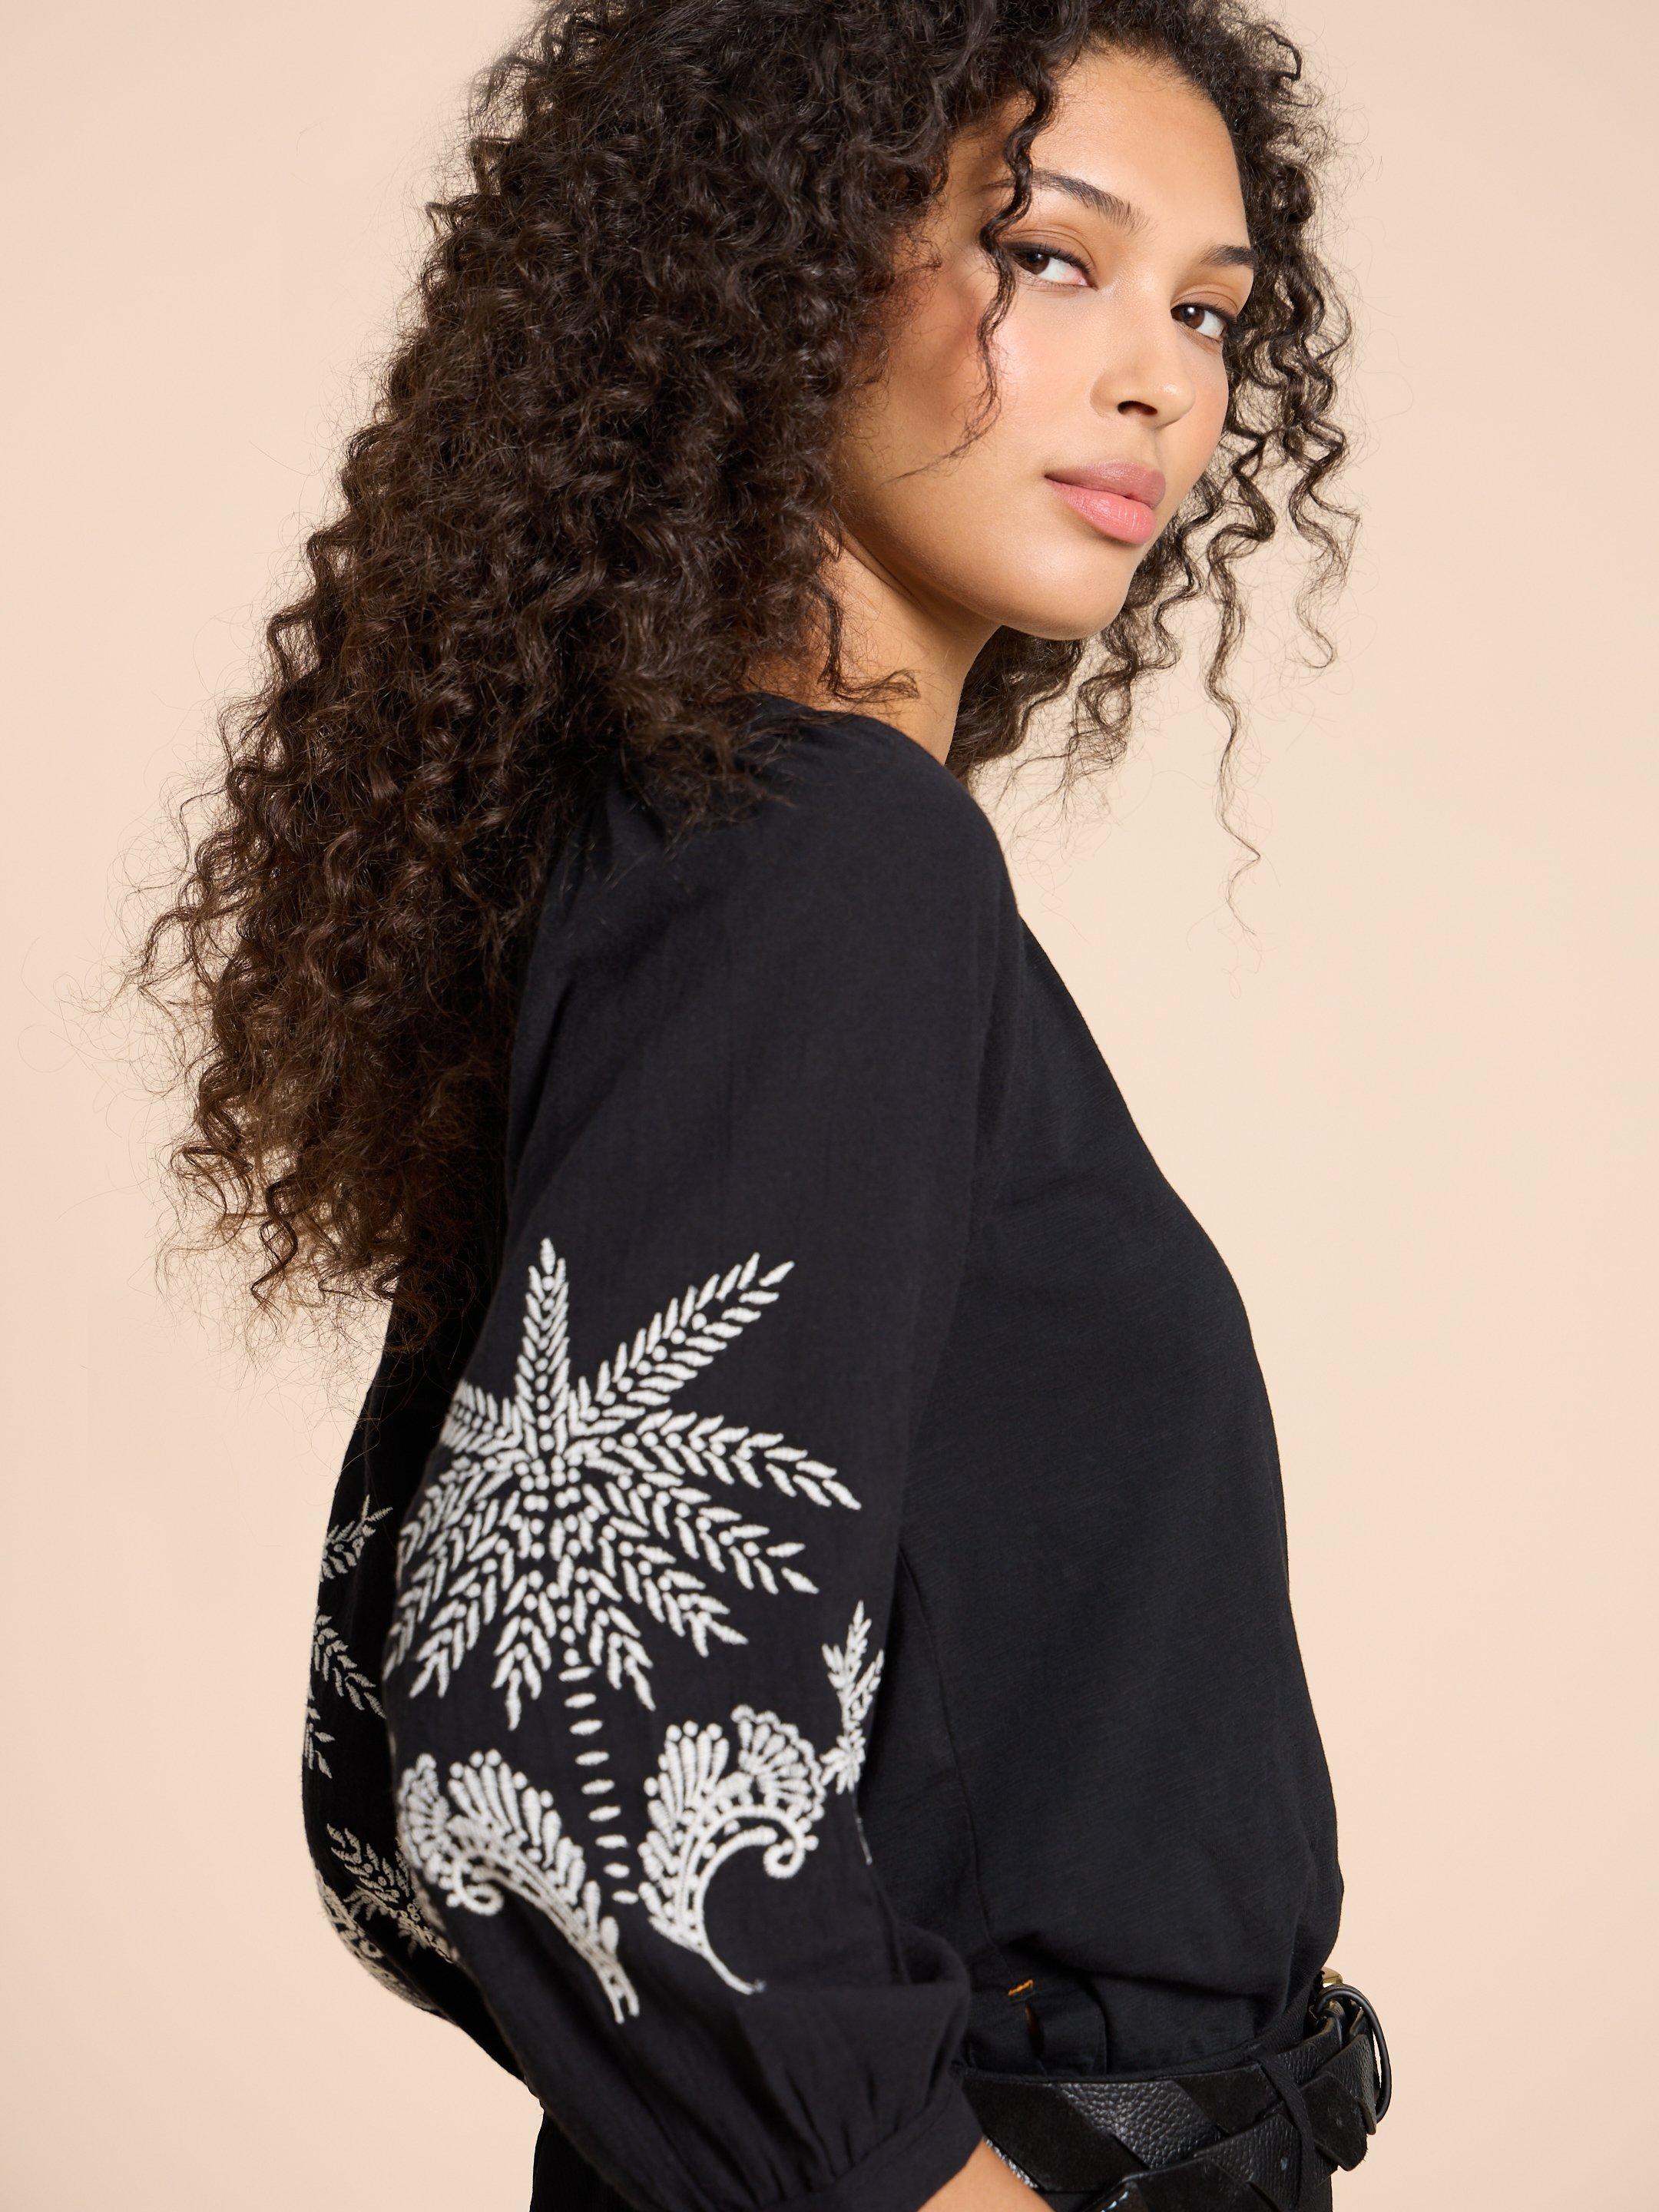 MILLIE MIX EMBROIDERED TOP in BLK MLT - MODEL DETAIL